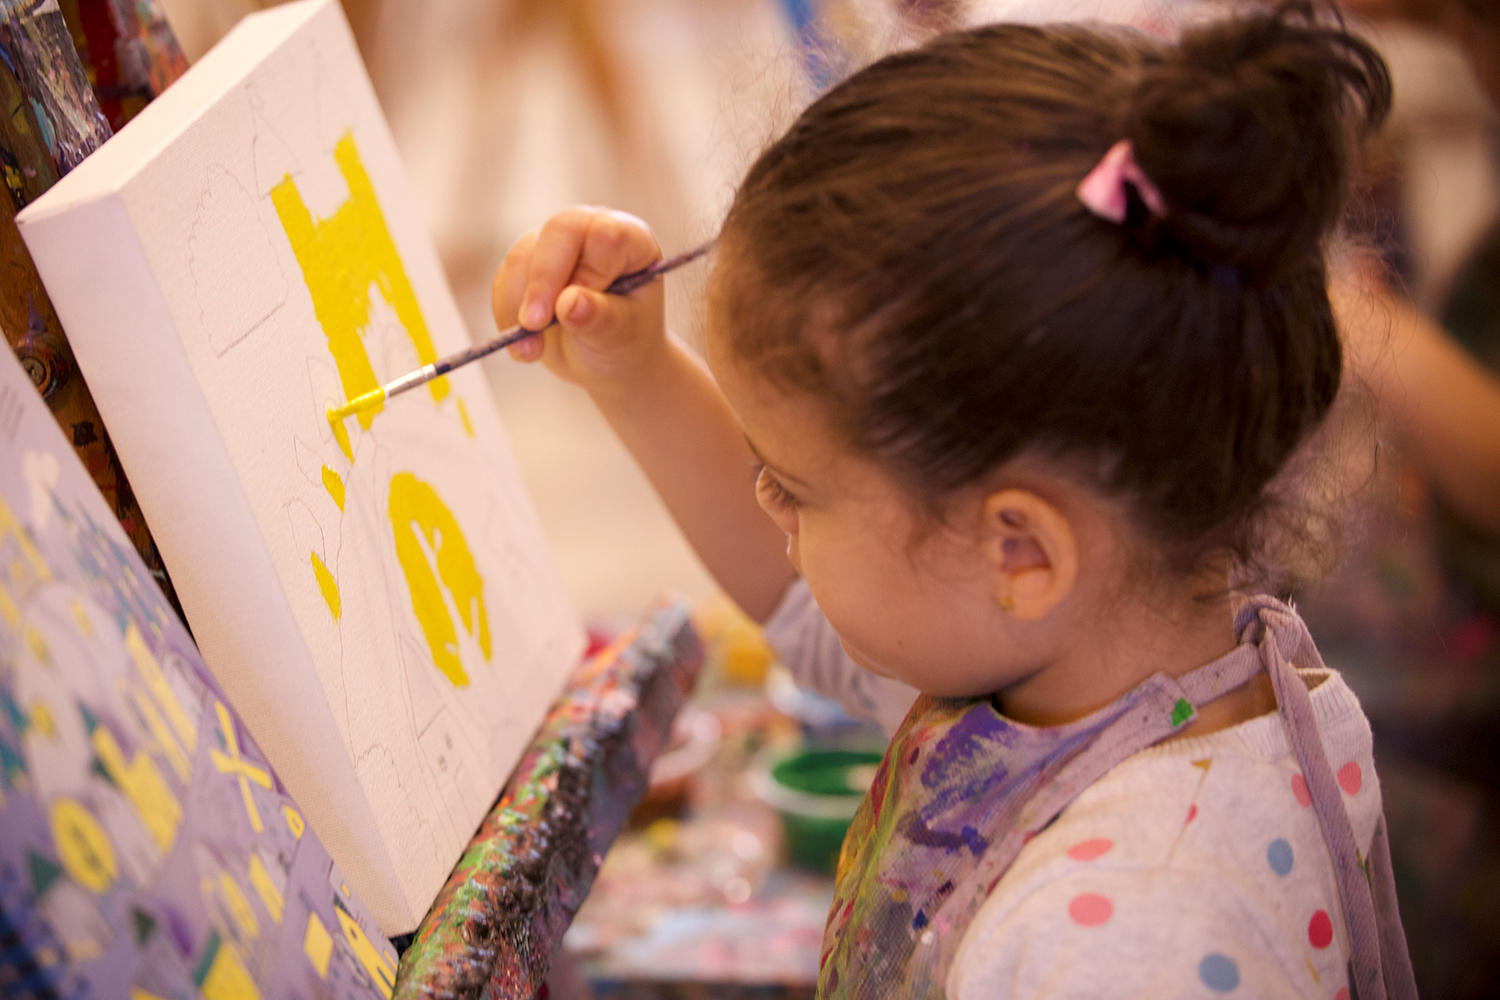 Kids can learn to paint with two UAE school teachers